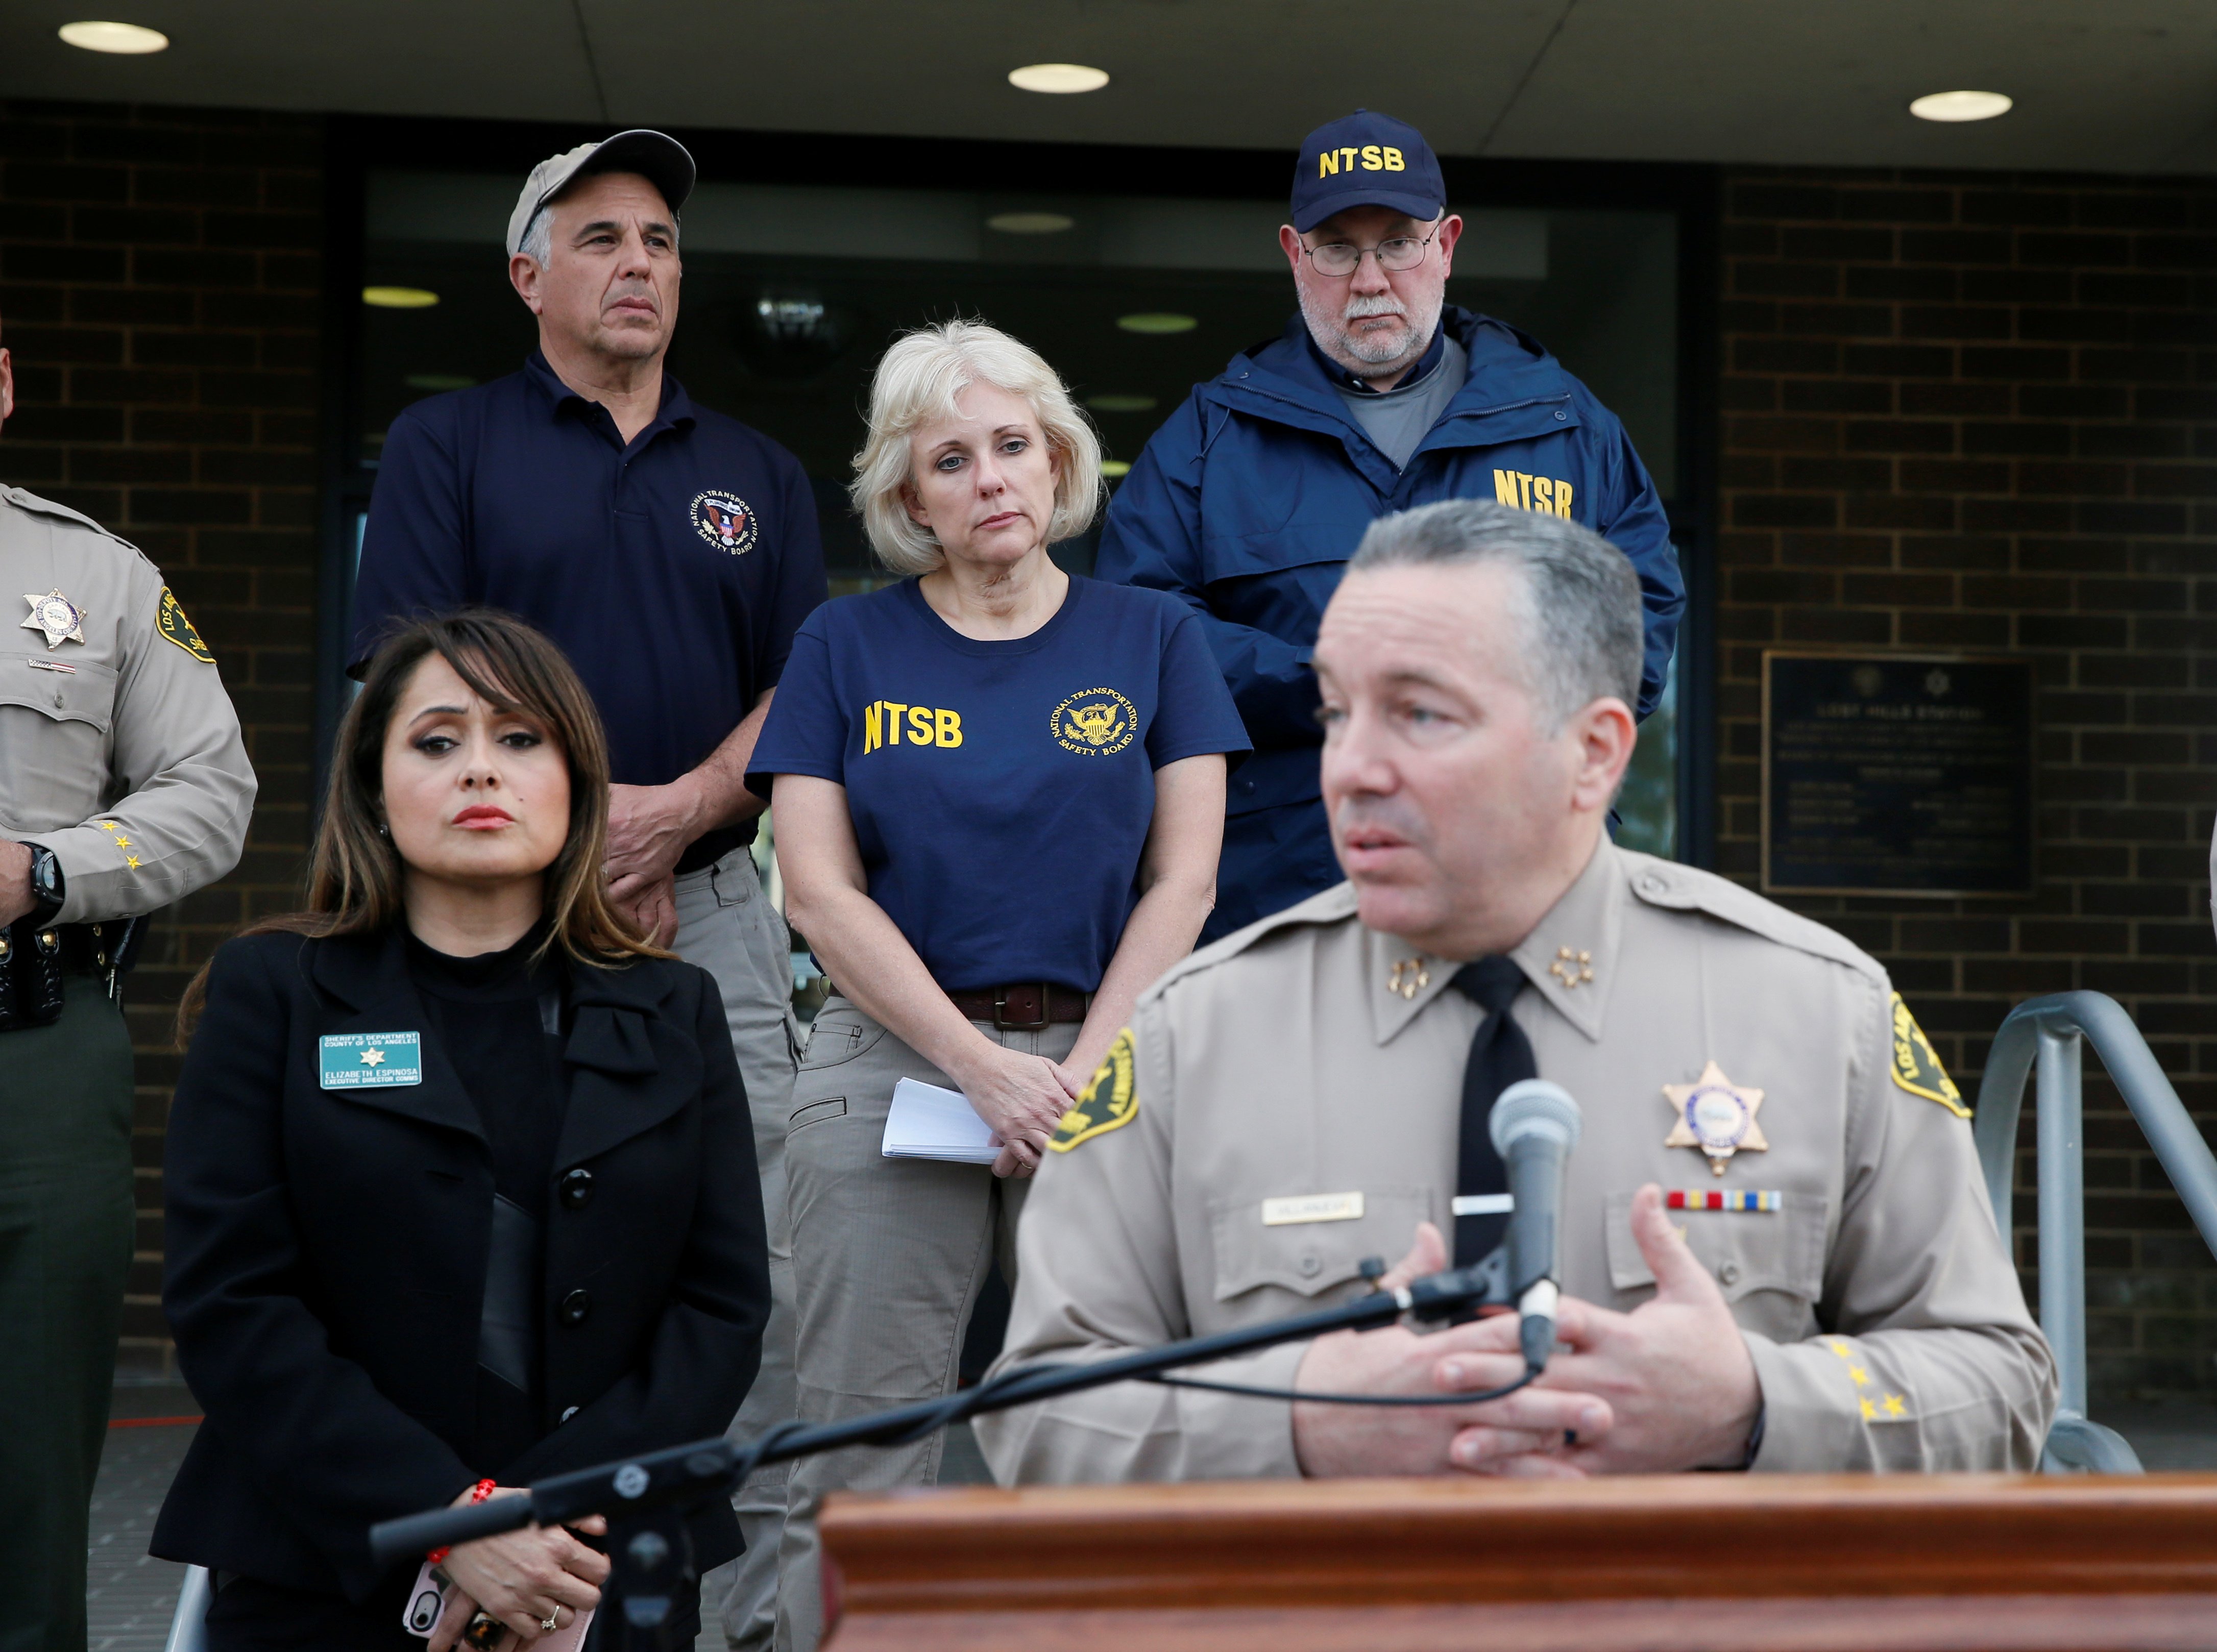 NTSB Board Member, Jennifer Homendy (3rd-L) listens along with other NTSB members while Los Angeles County Sheriff Alex Villanueva speaks about the helicopter crash of NBA star Kobe Bryant during a media availability in Calabasas, California, U.S., Jan. 27, 2020. REUTERS/Danny Moloshok 